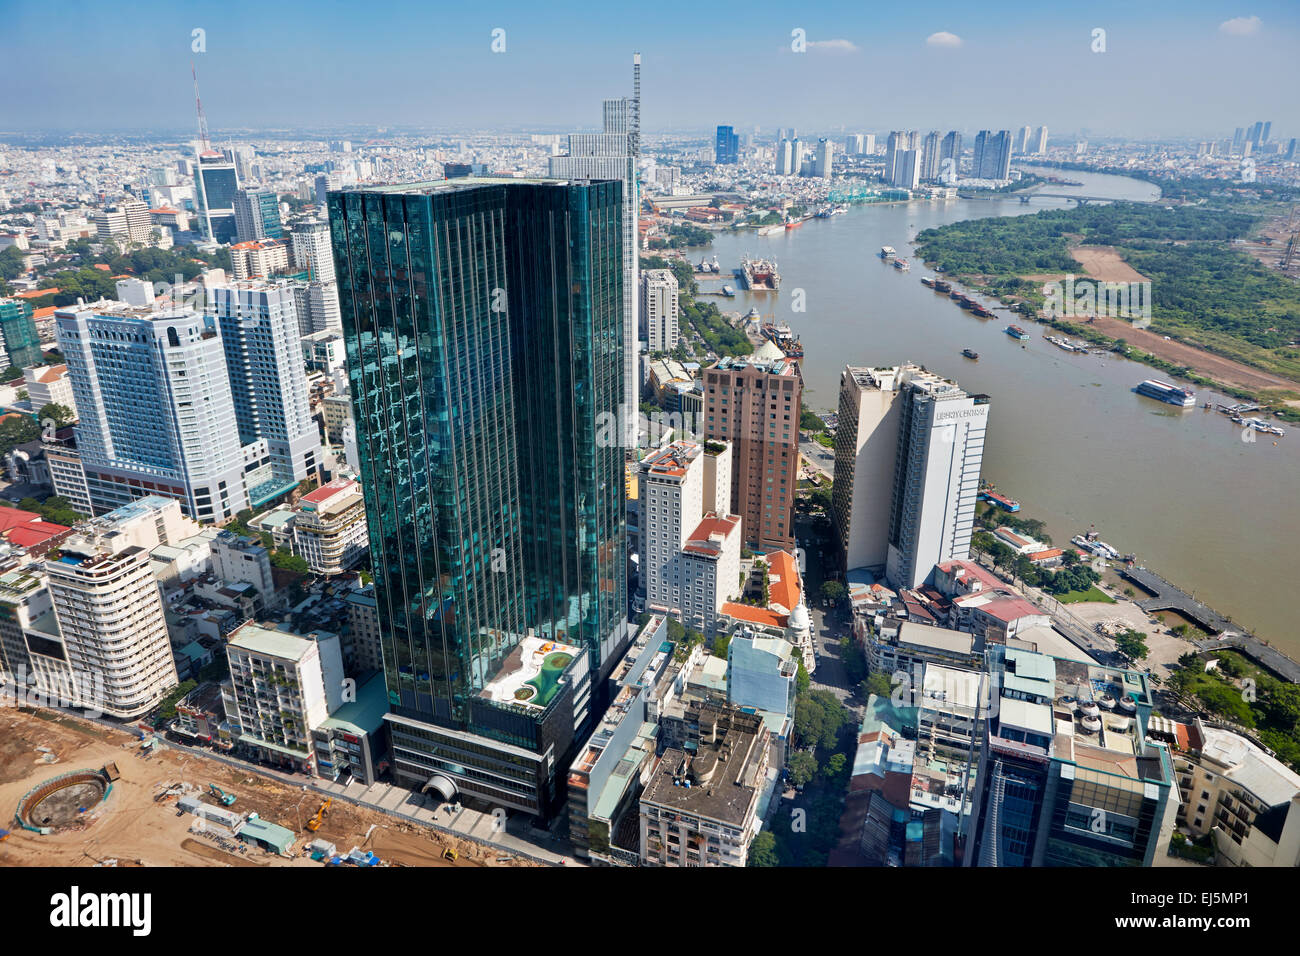 Aerial view of the city and Saigon River from Bitexco Financial Tower Observation Deck. District 1, Ho Chi Minh City, Vietnam. Stock Photo